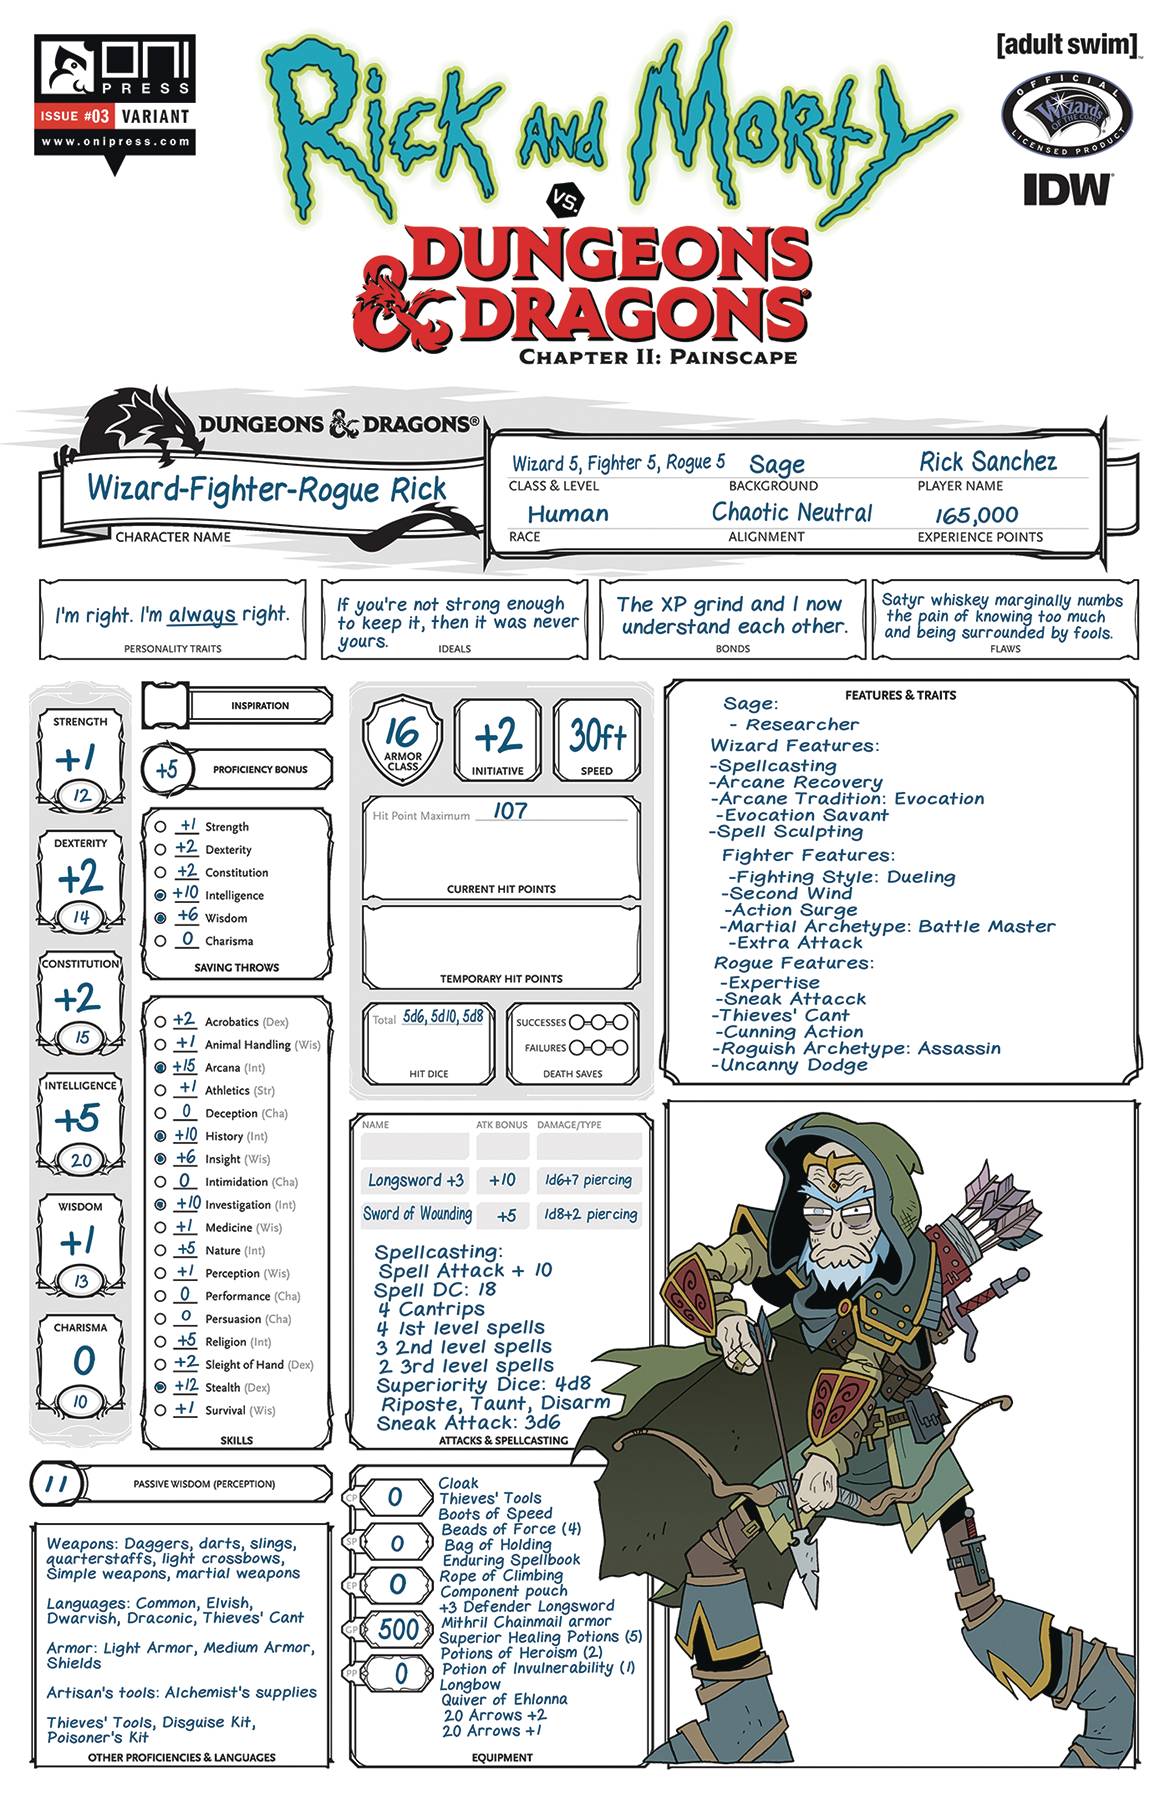 Rick and Morty Vs Dungeons & Dragons II Painscape #3 Cover C Character Sheet (Mature)